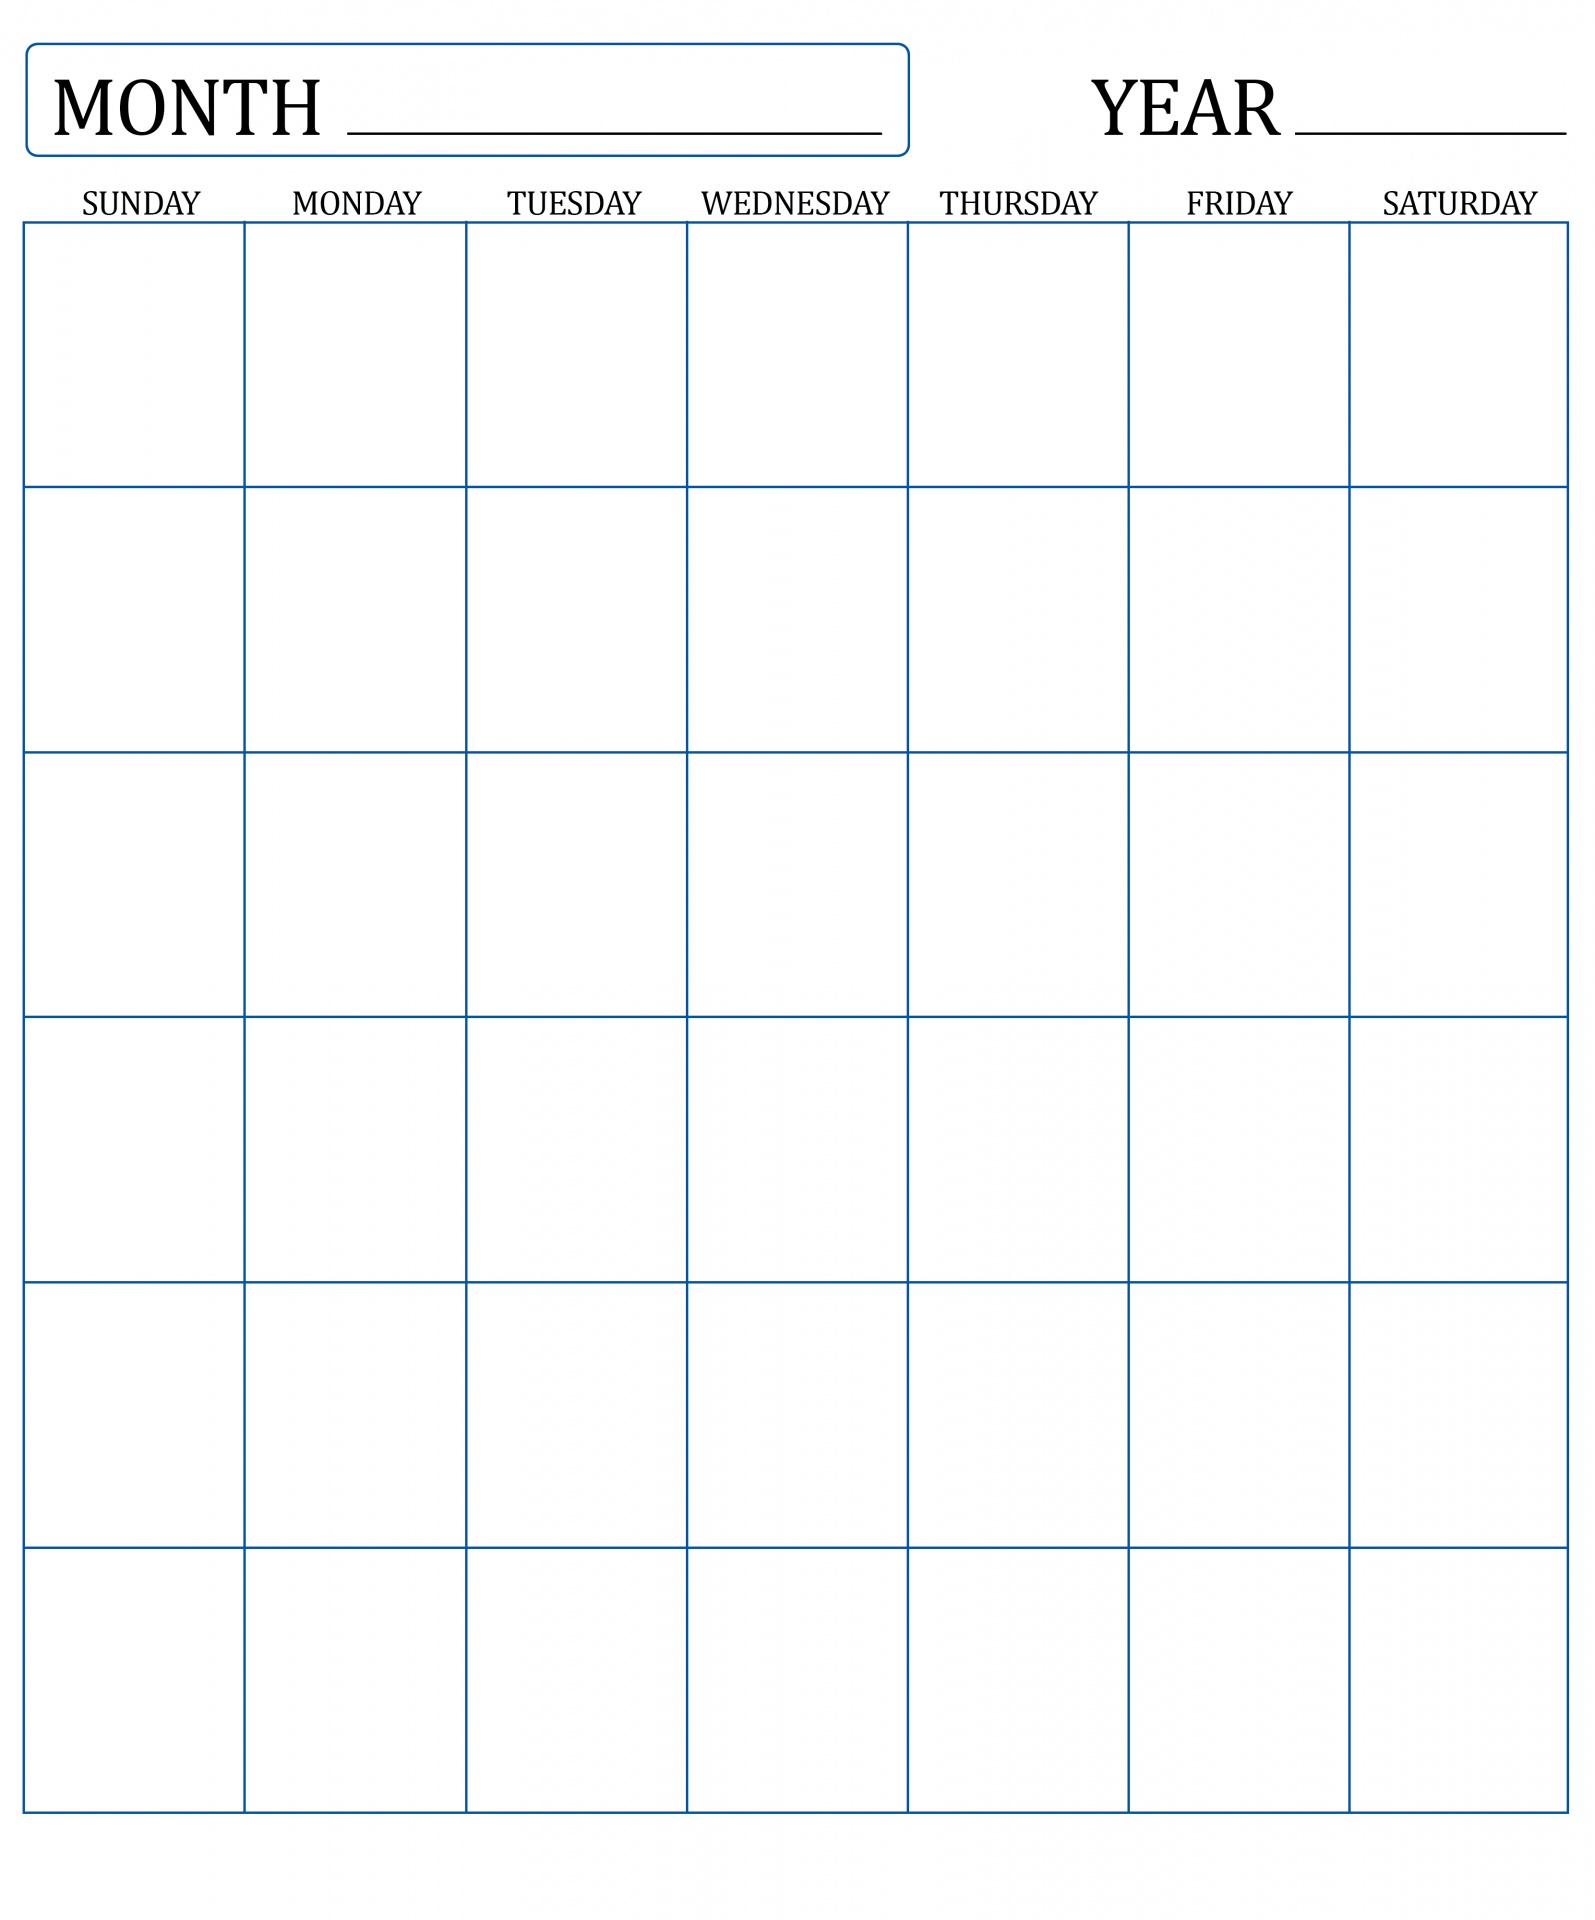 2016 Monthly Planner Template from storage.needpix.com